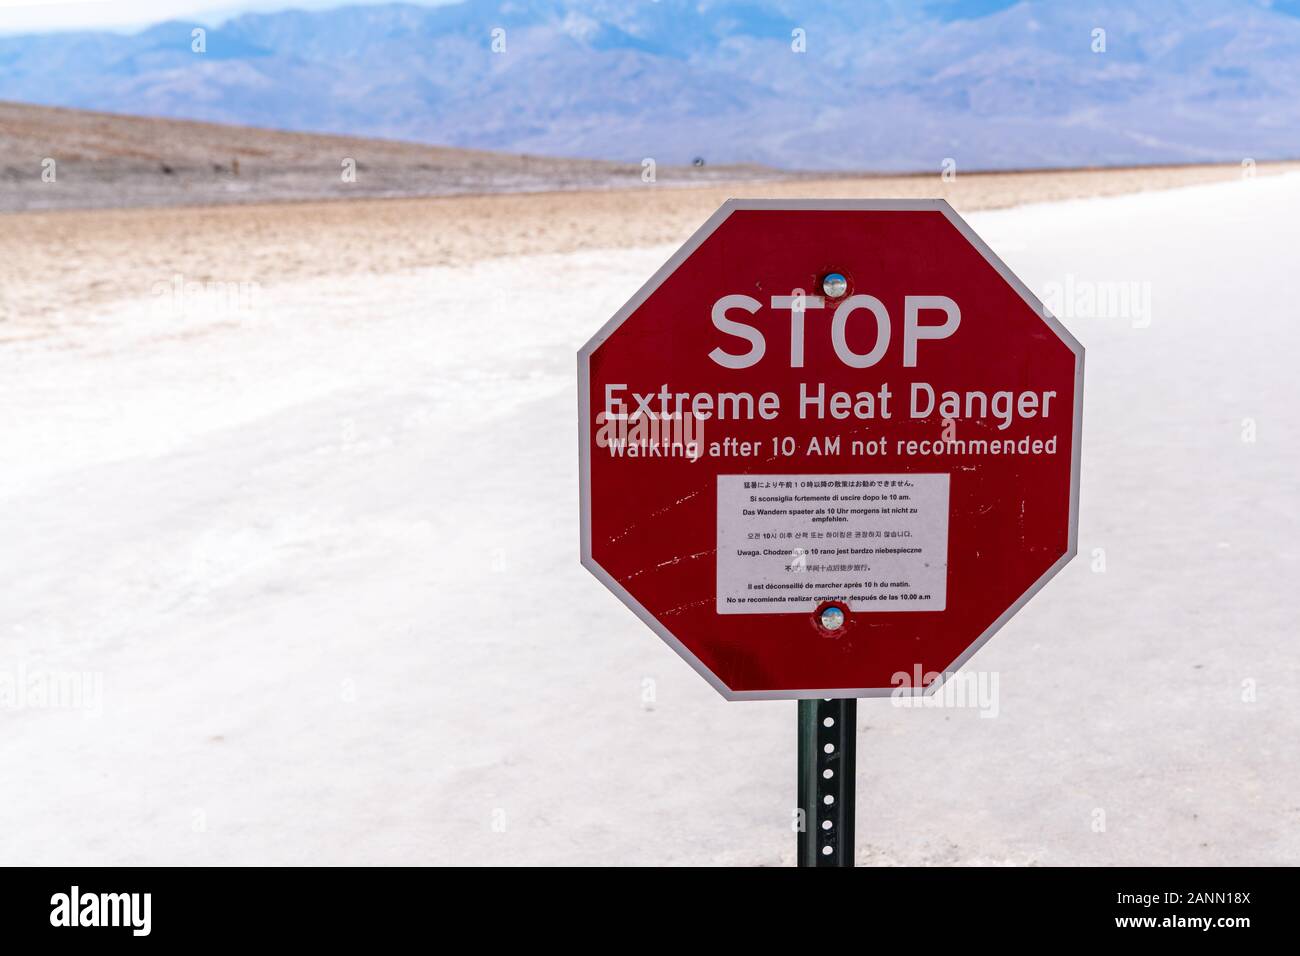 Extreme Heat Warning Sign at Badwater Basin in Death Valley, United States Stock Photo